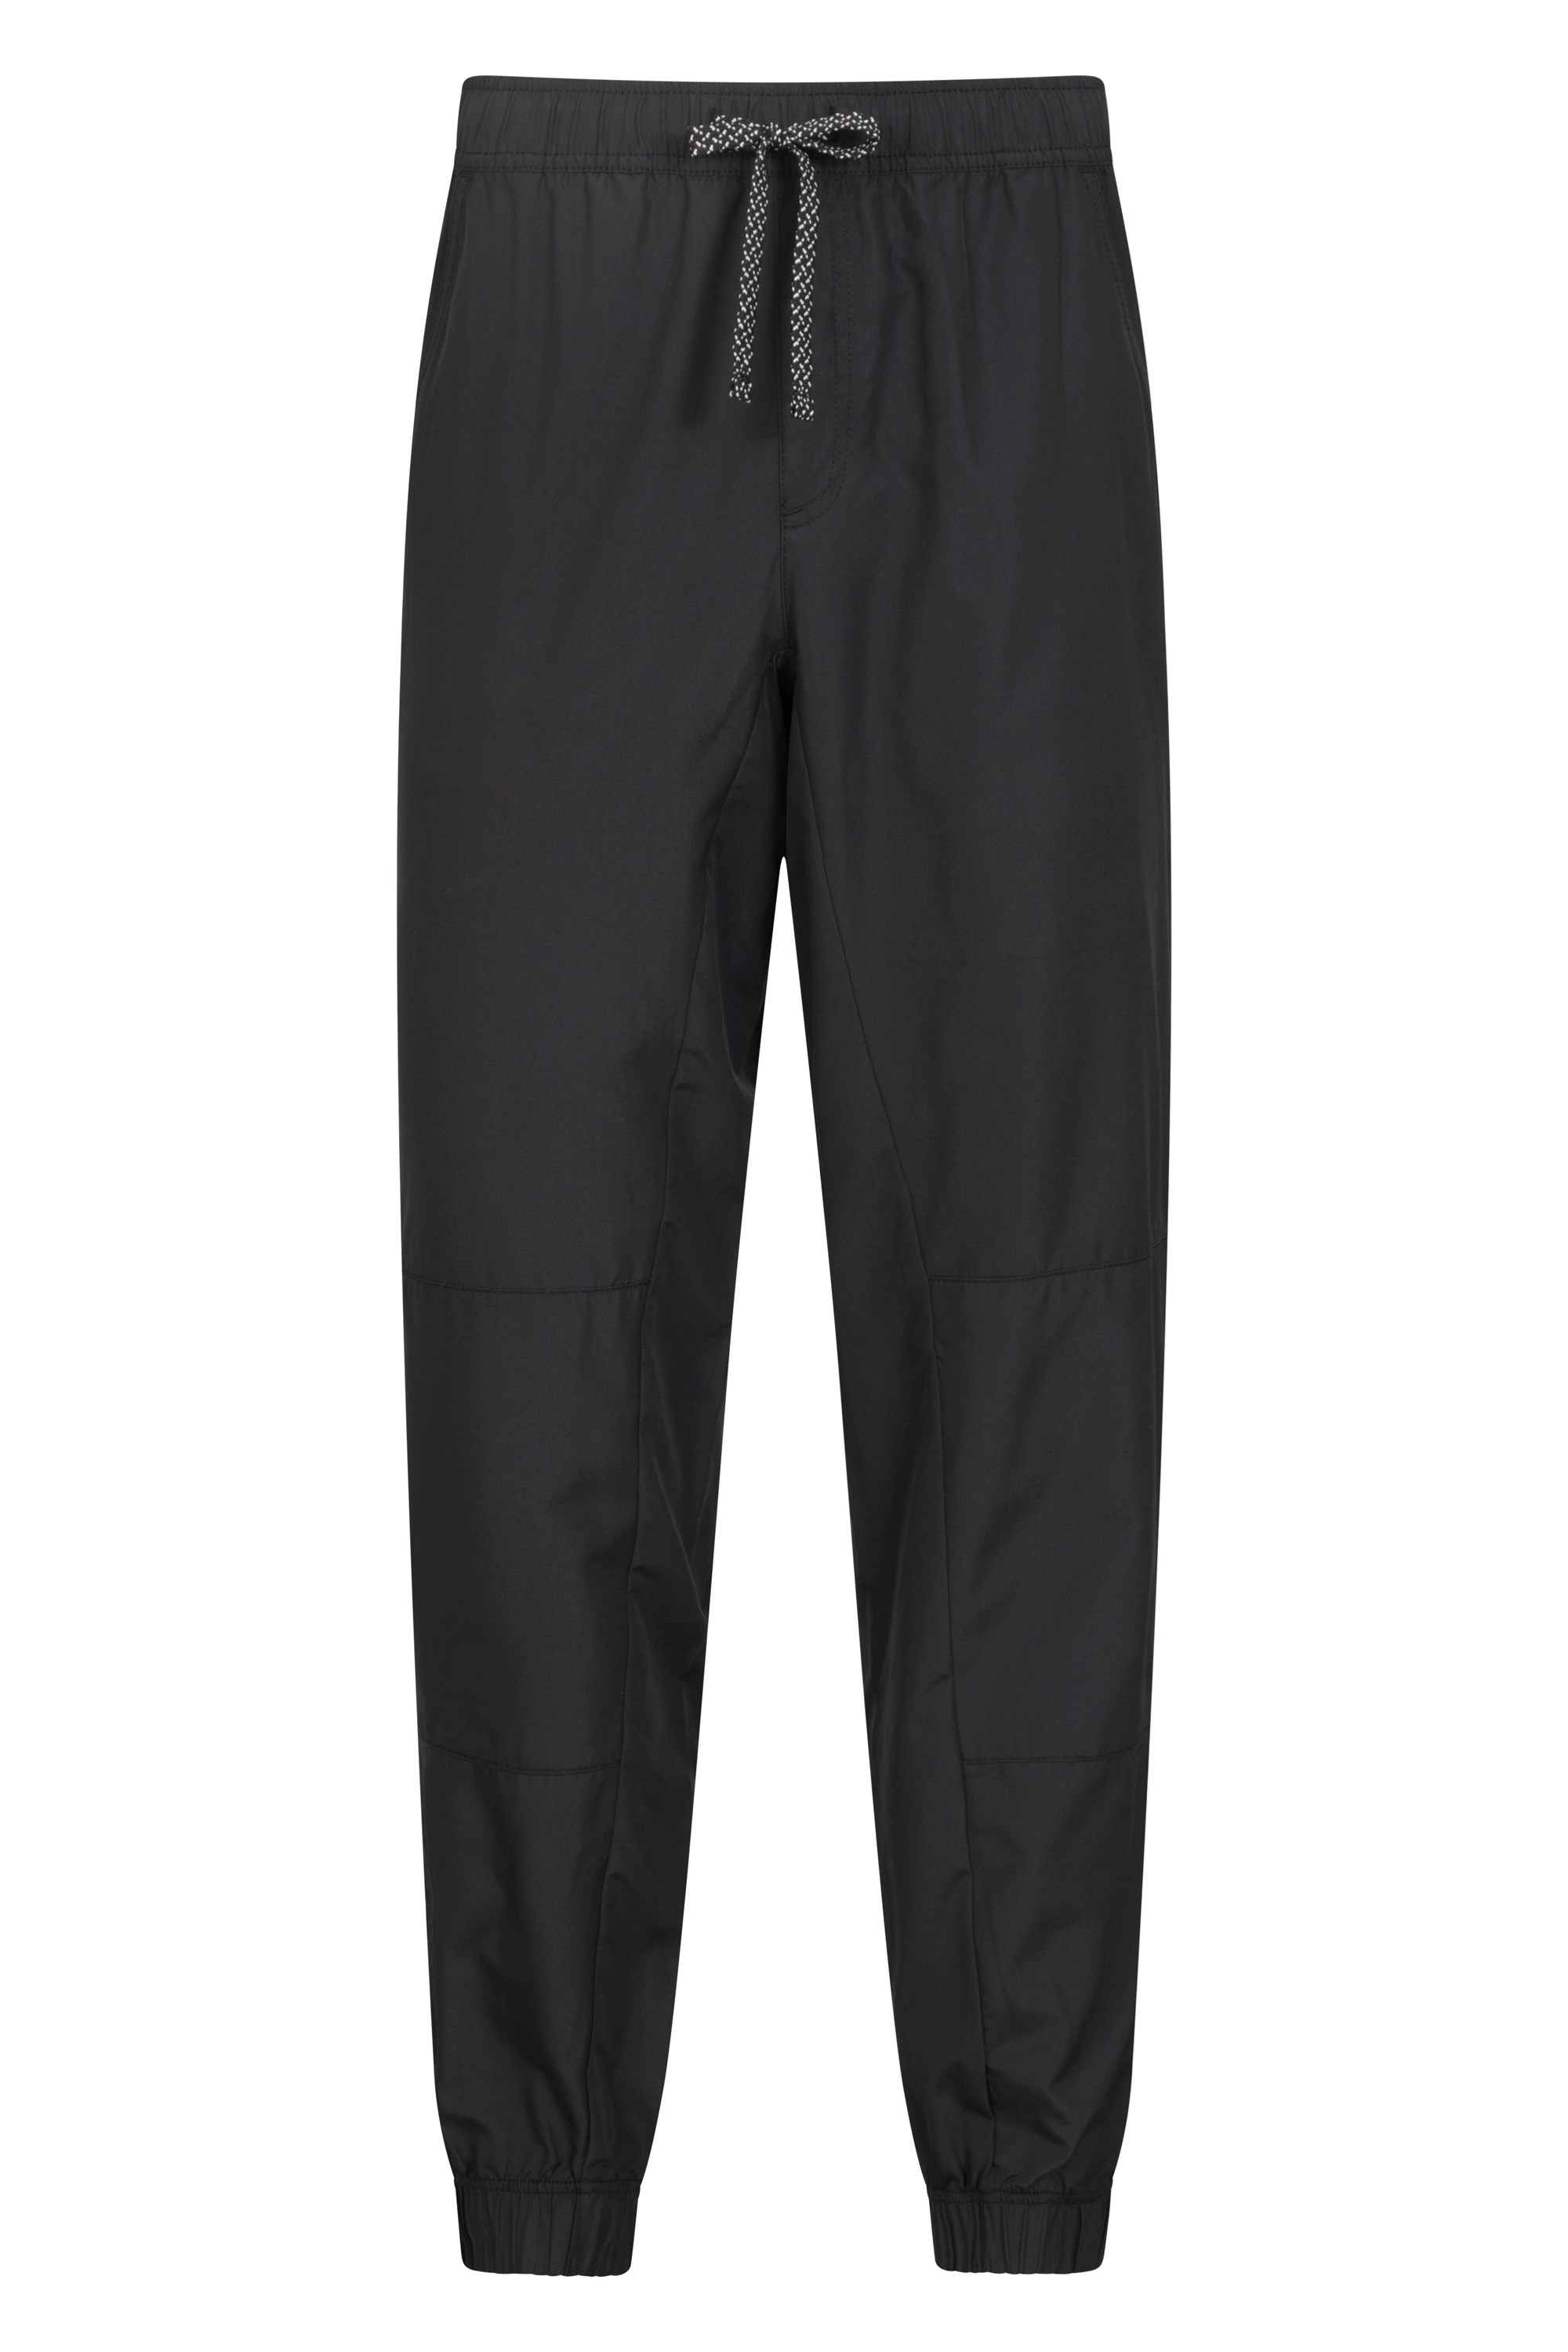 Action Mens Drawcord Walking Trousers - Long - Black